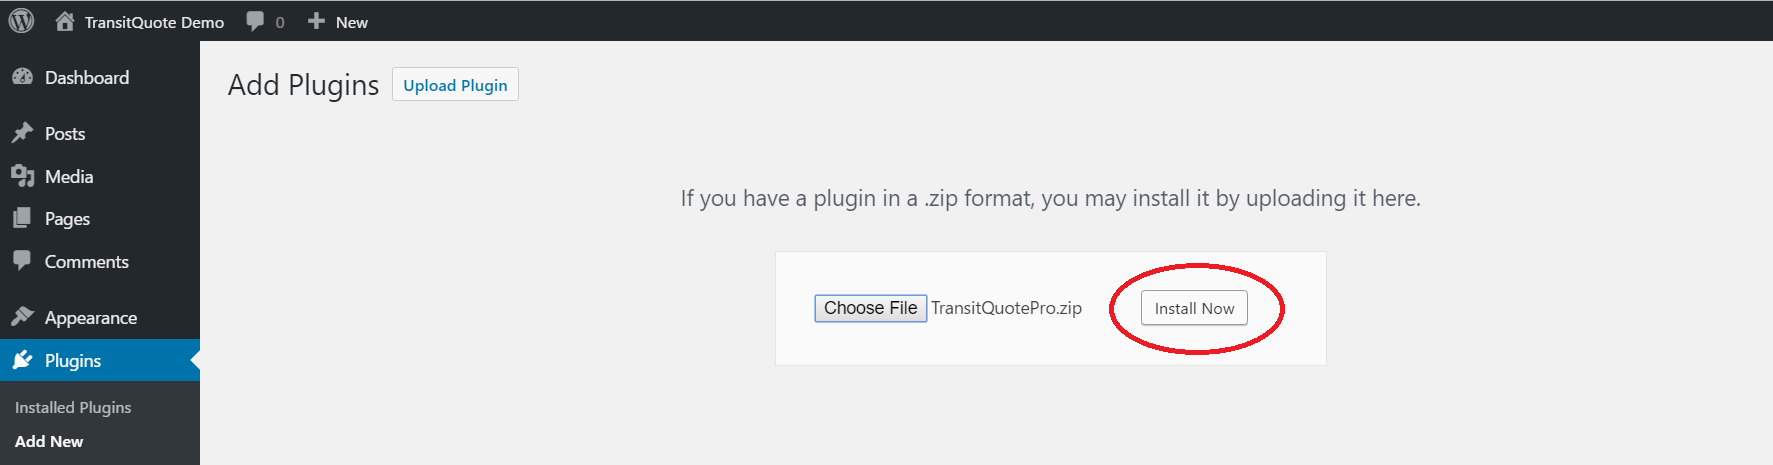 After selecting the TransitQuotePro.zip file, click the Install Now button to install the plugin on your website.